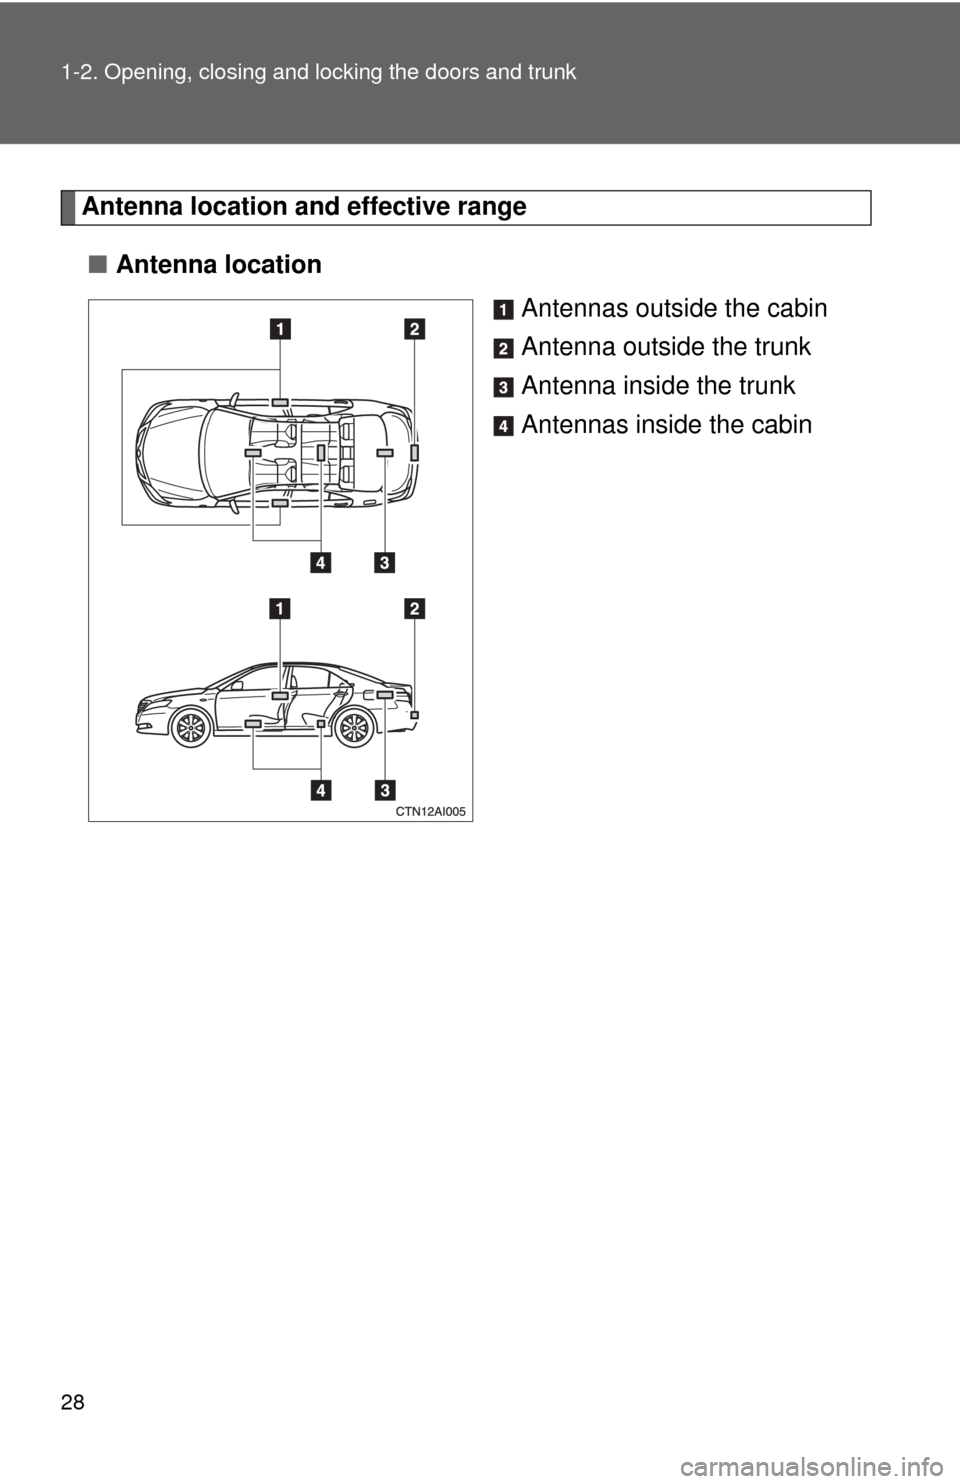 TOYOTA CAMRY 2009 XV40 / 8.G Owners Manual 28 1-2. Opening, closing and locking the doors and trunk
Antenna location and effective range
■ Antenna location
Antennas outside the cabin
Antenna outside the trunk
Antenna inside the trunk
Antenna